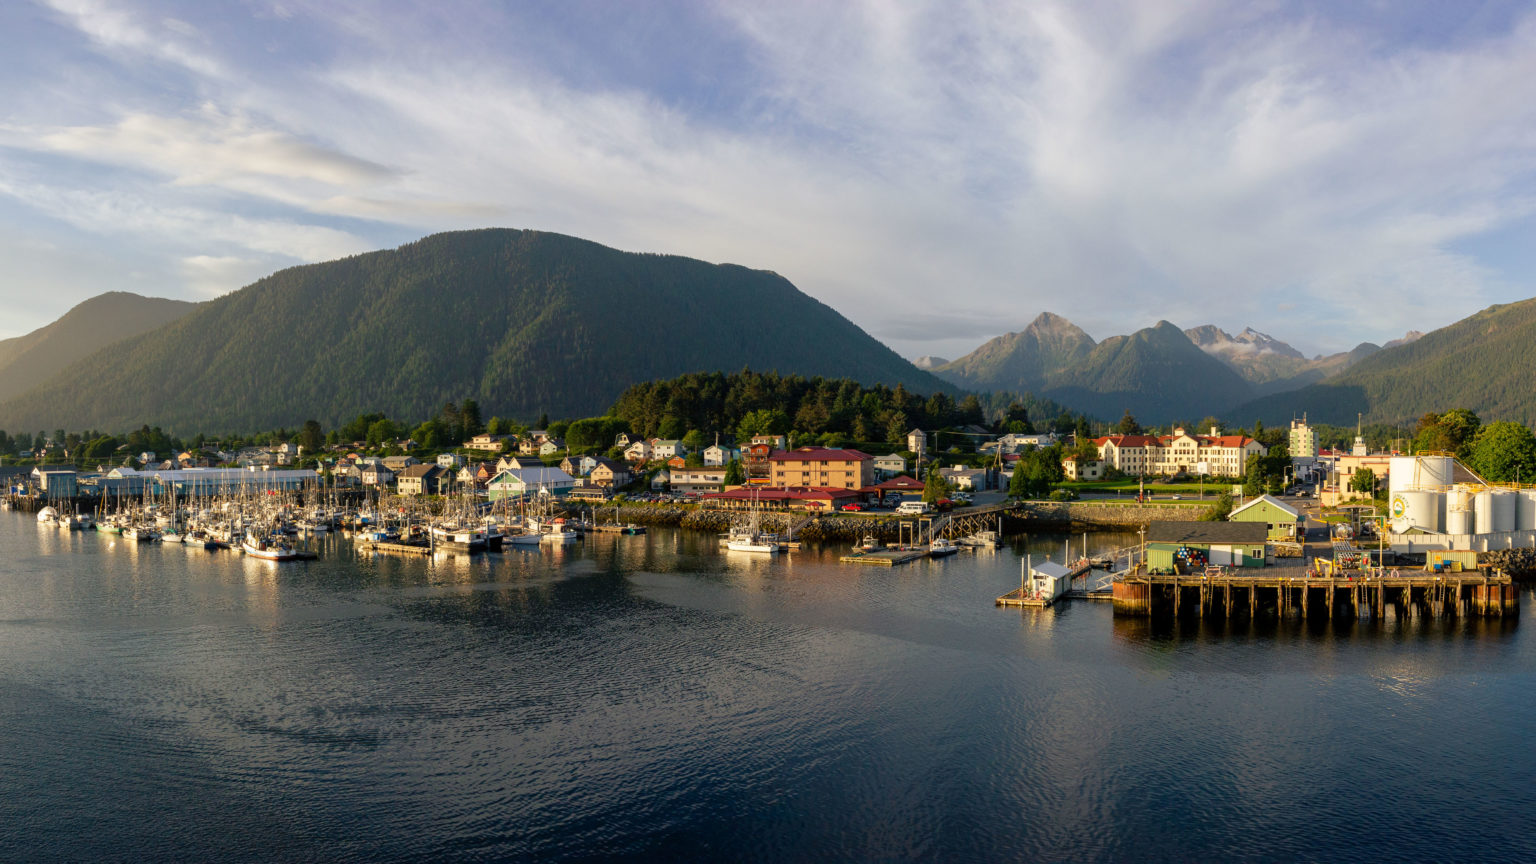 Sitka may be close to enacting new restrictions on short-term rentals - KTOO